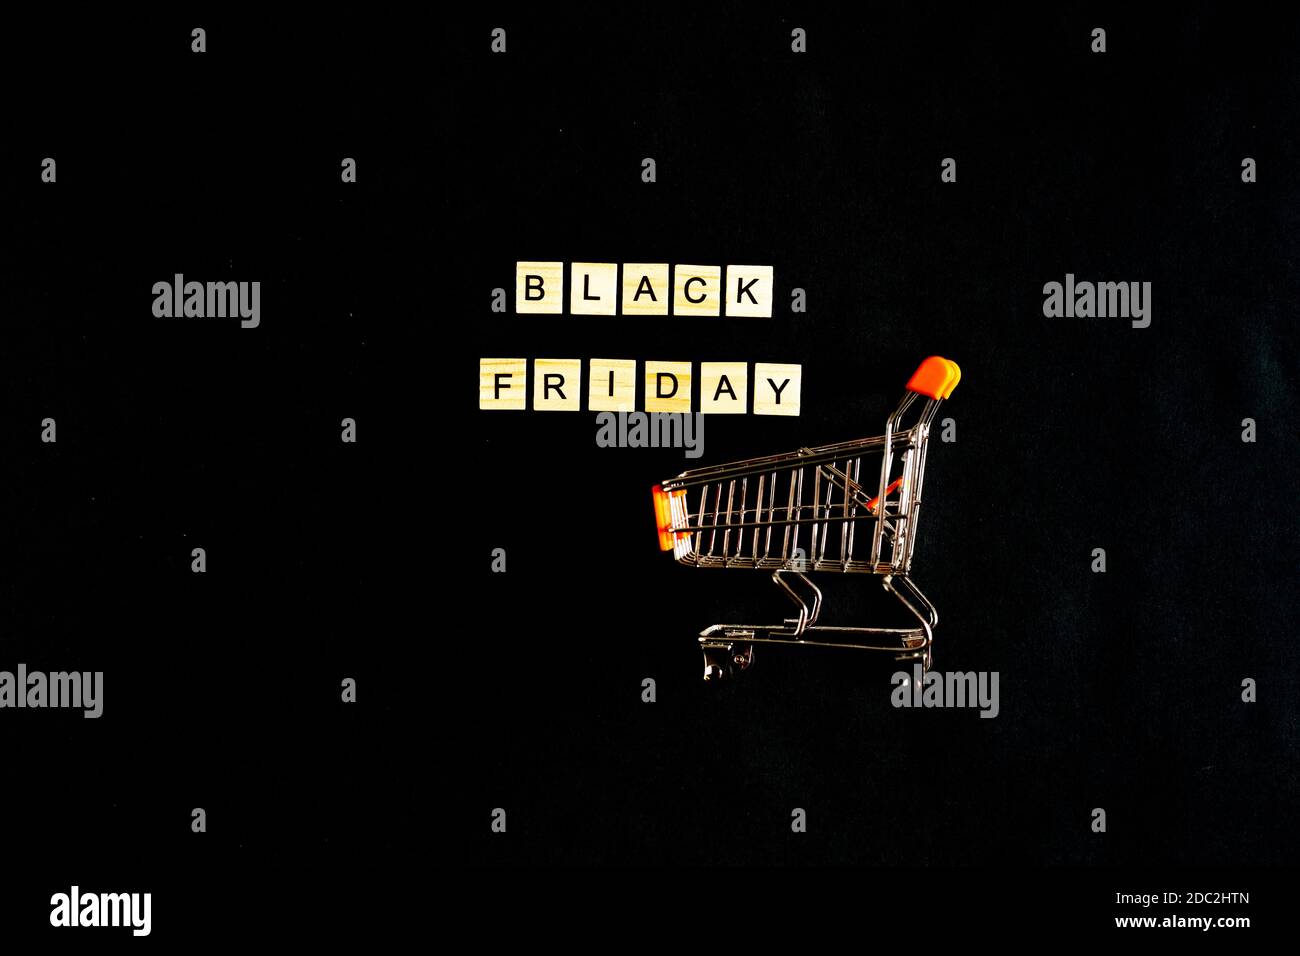 Black Friday written in wooden letters on a black background with a shopping basket, sales, holiday sales, top view, flat layout, price reduction Stock Photo